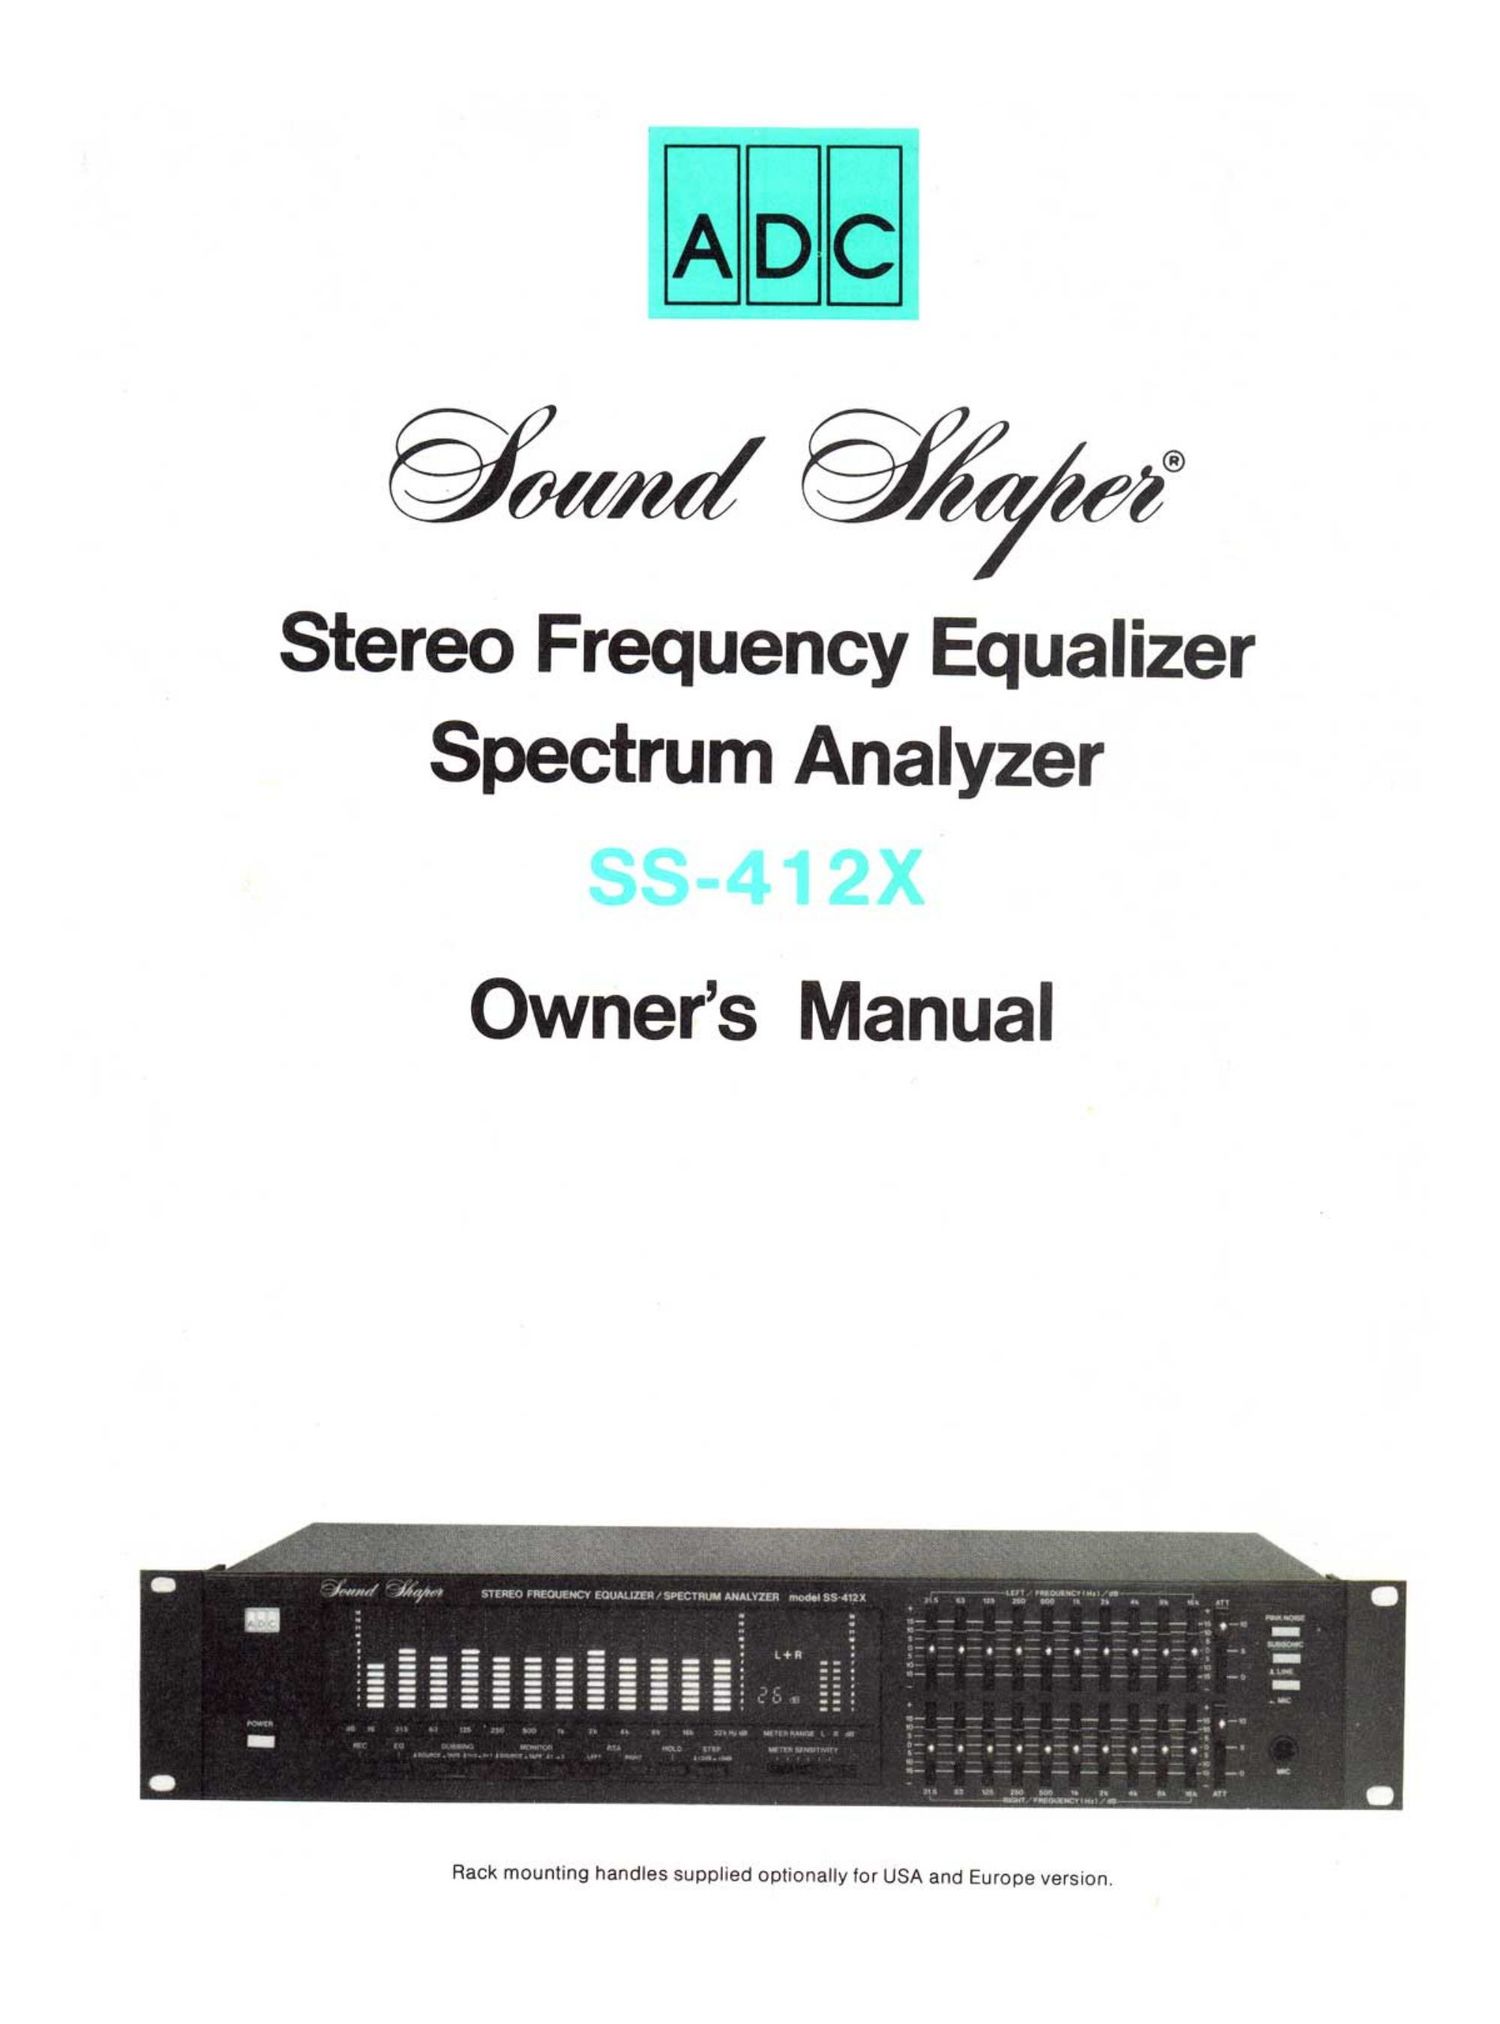 adc soundshaper 412x owners manual